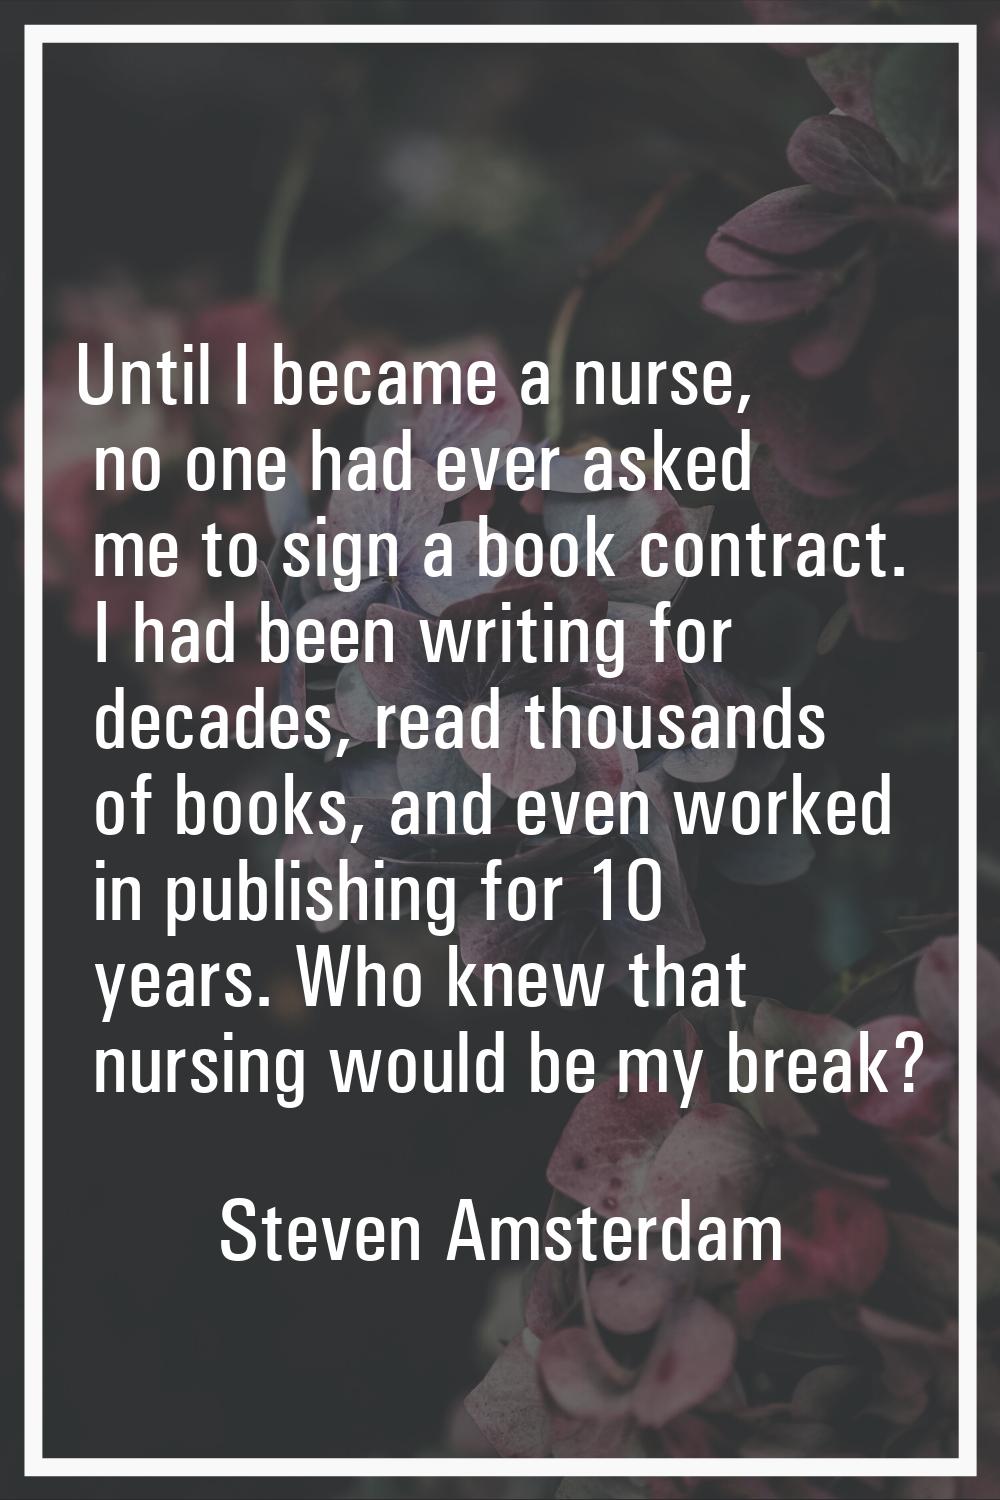 Until I became a nurse, no one had ever asked me to sign a book contract. I had been writing for de